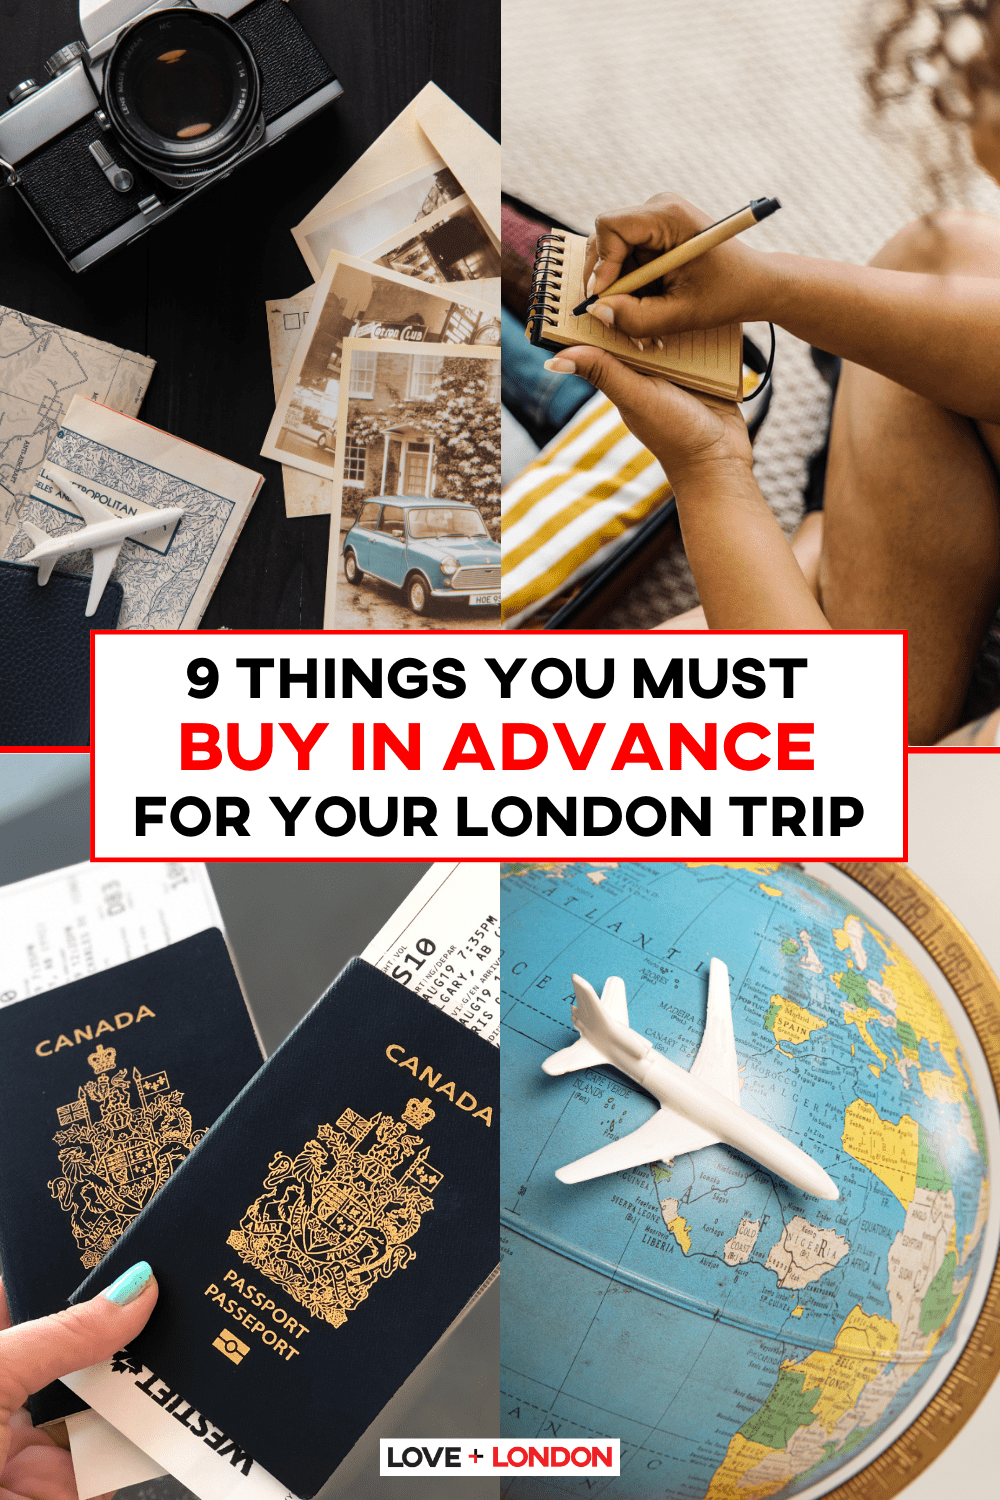 9 Things You Must Buy in Advance for Your London Trip